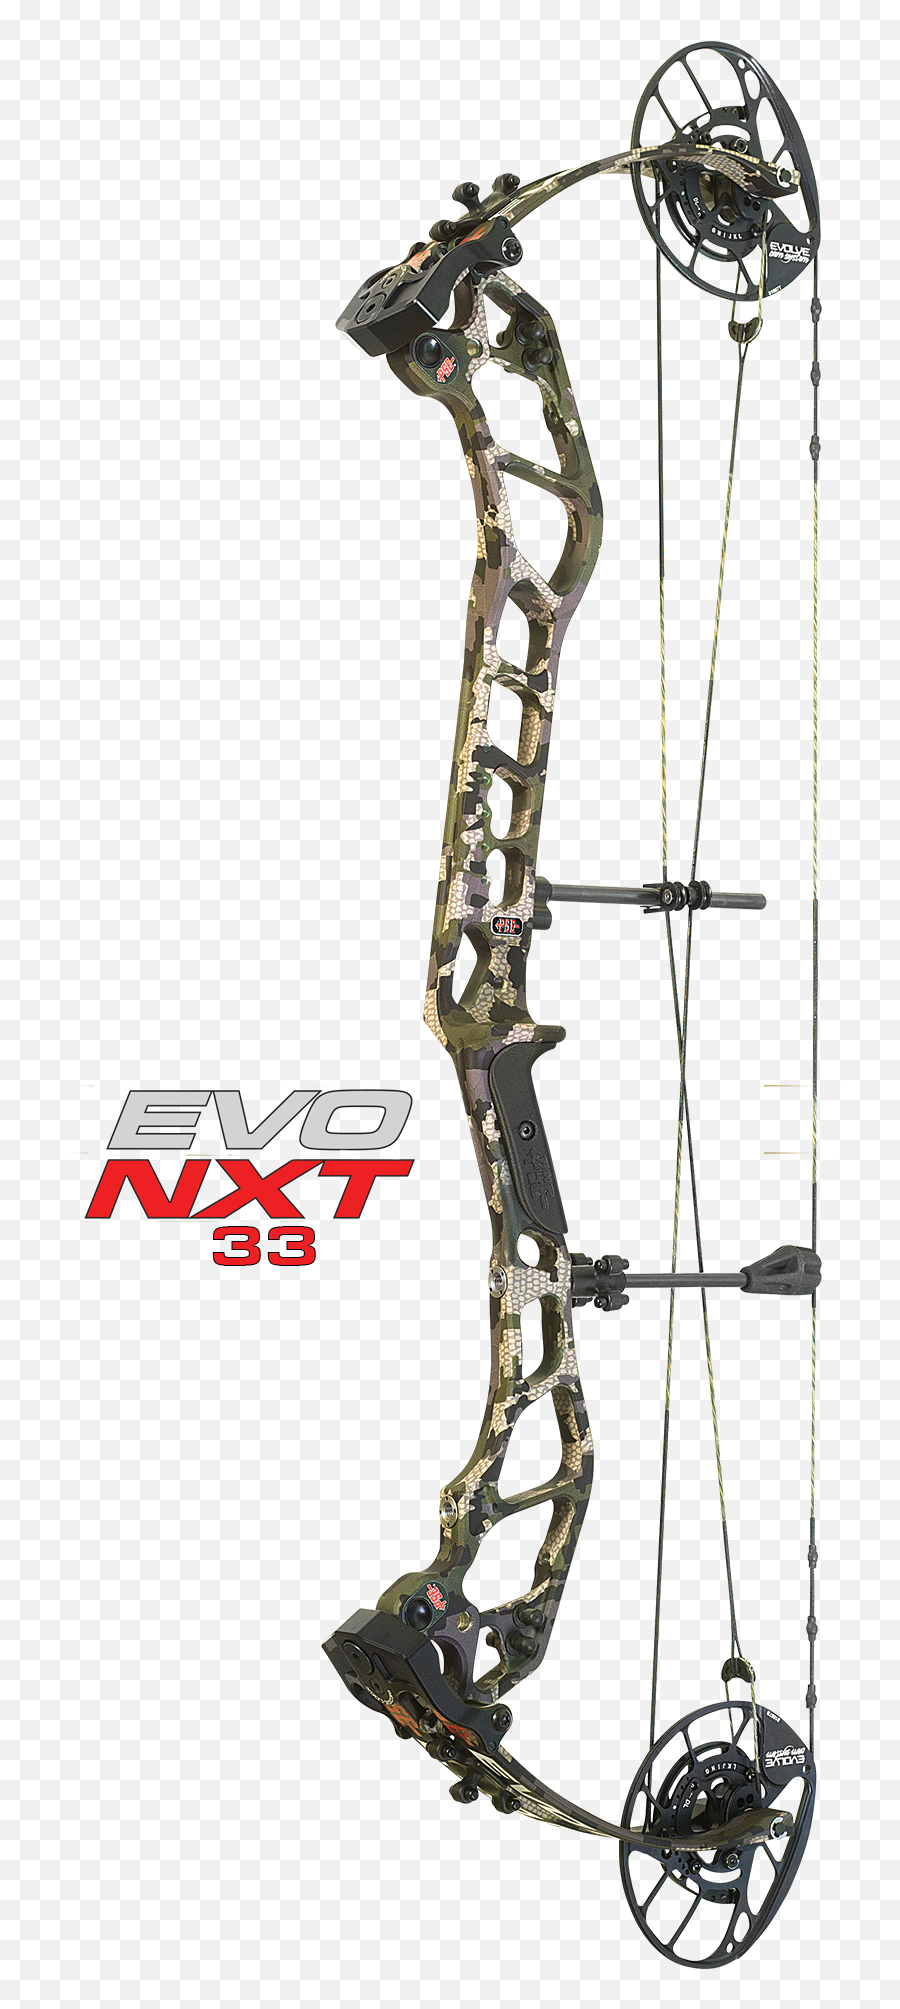 Pse Archery U2013 Experience Performance - Pse Evo Nxt 33 Png,Bows Png